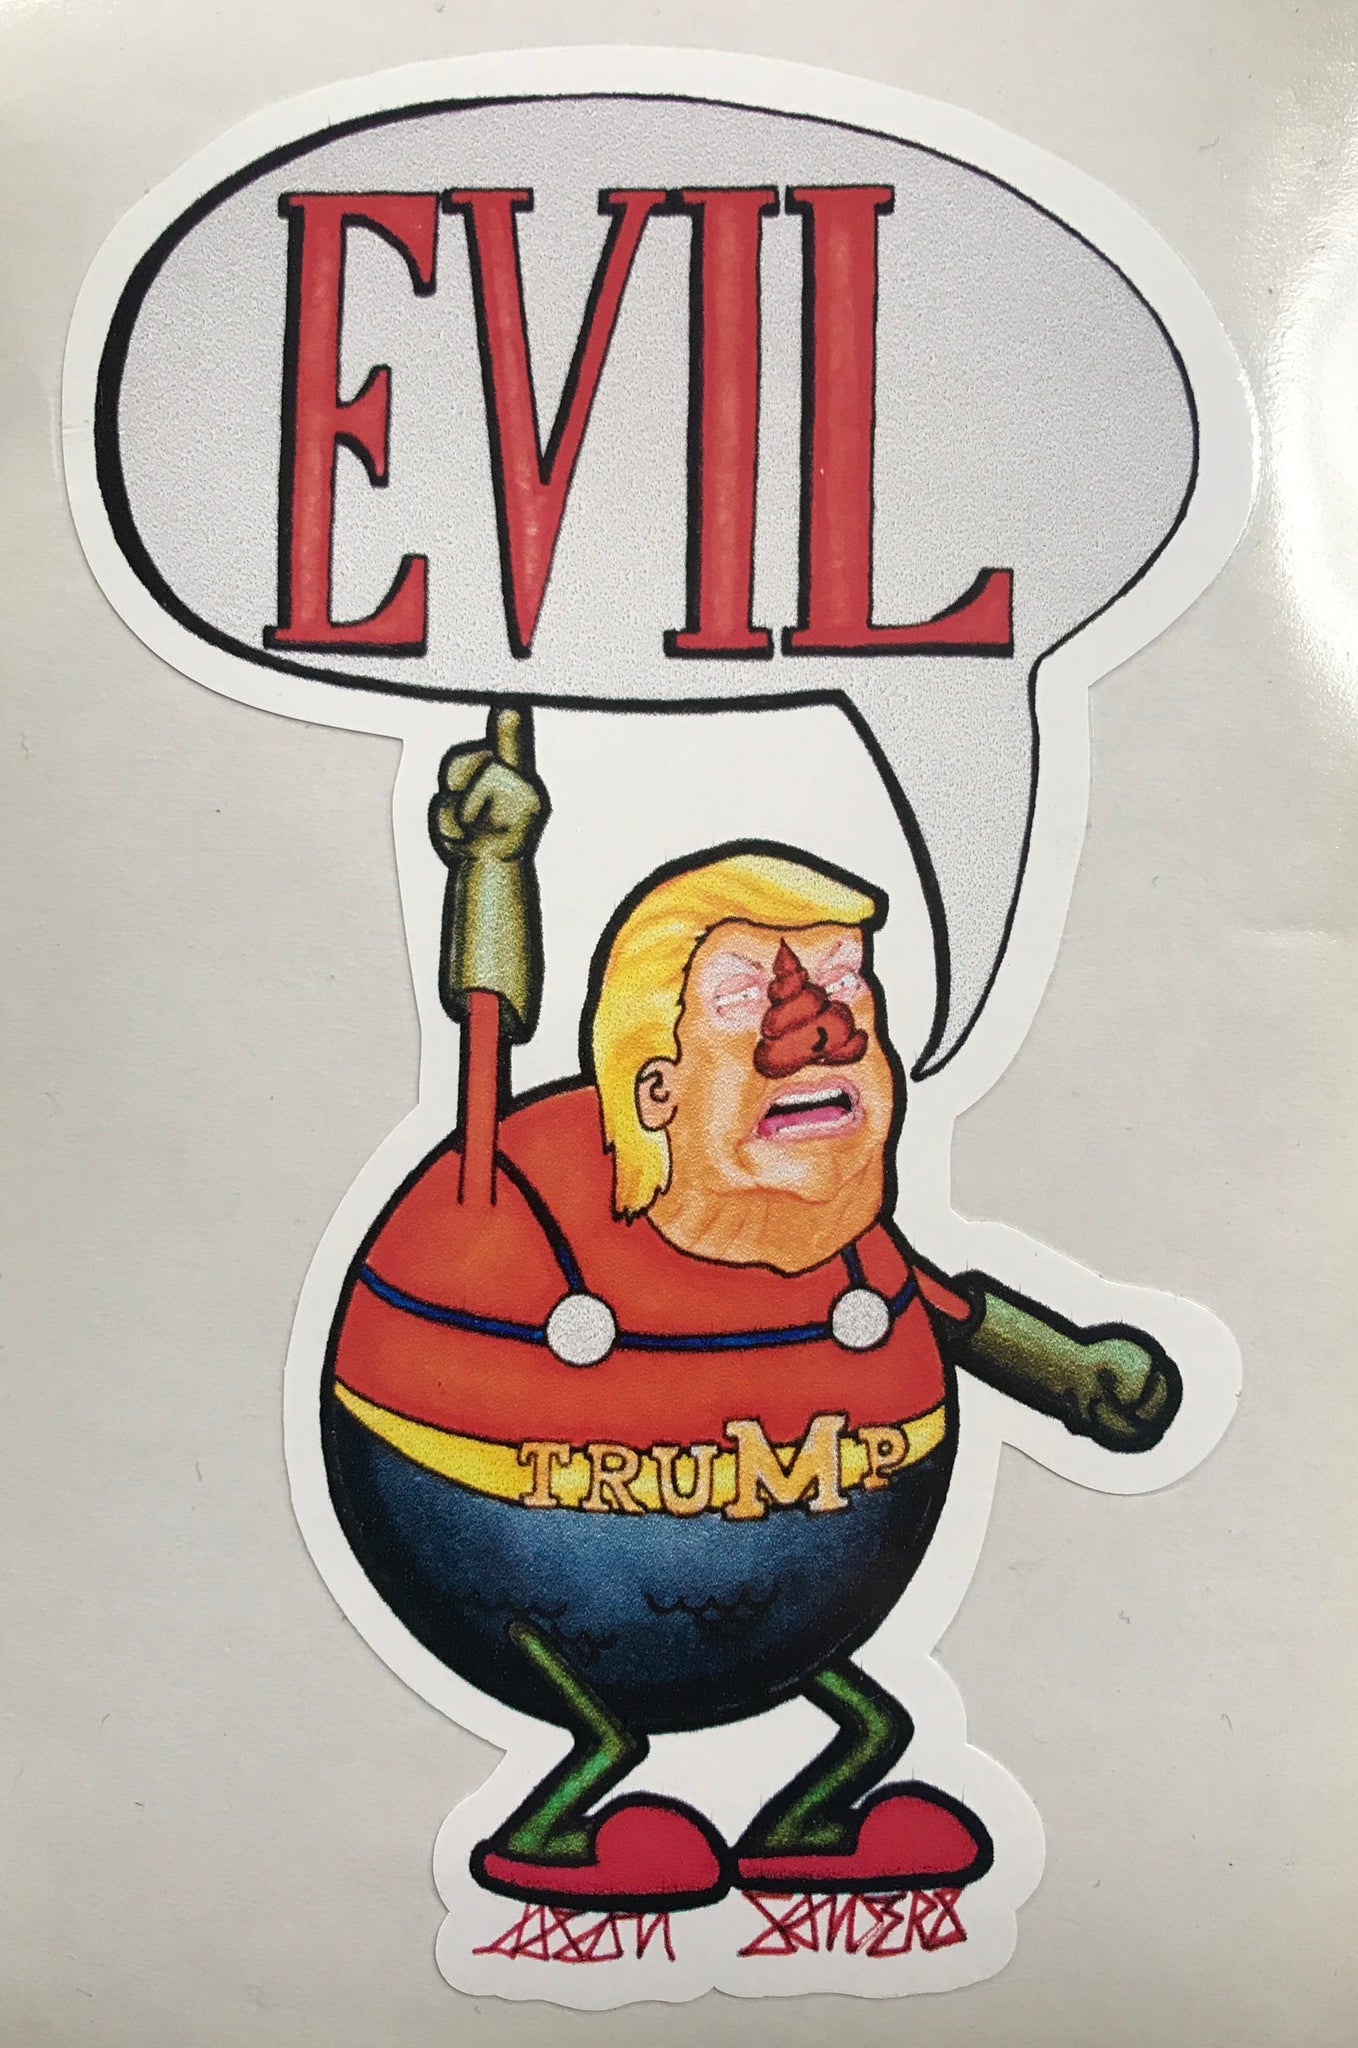 'EVIL' This sticker features Donald Trump as Mermaid Man from Spongebob Squarepants.   This ‘EVIL’ sticker is approximately 4.75” tall and 3” wide.  